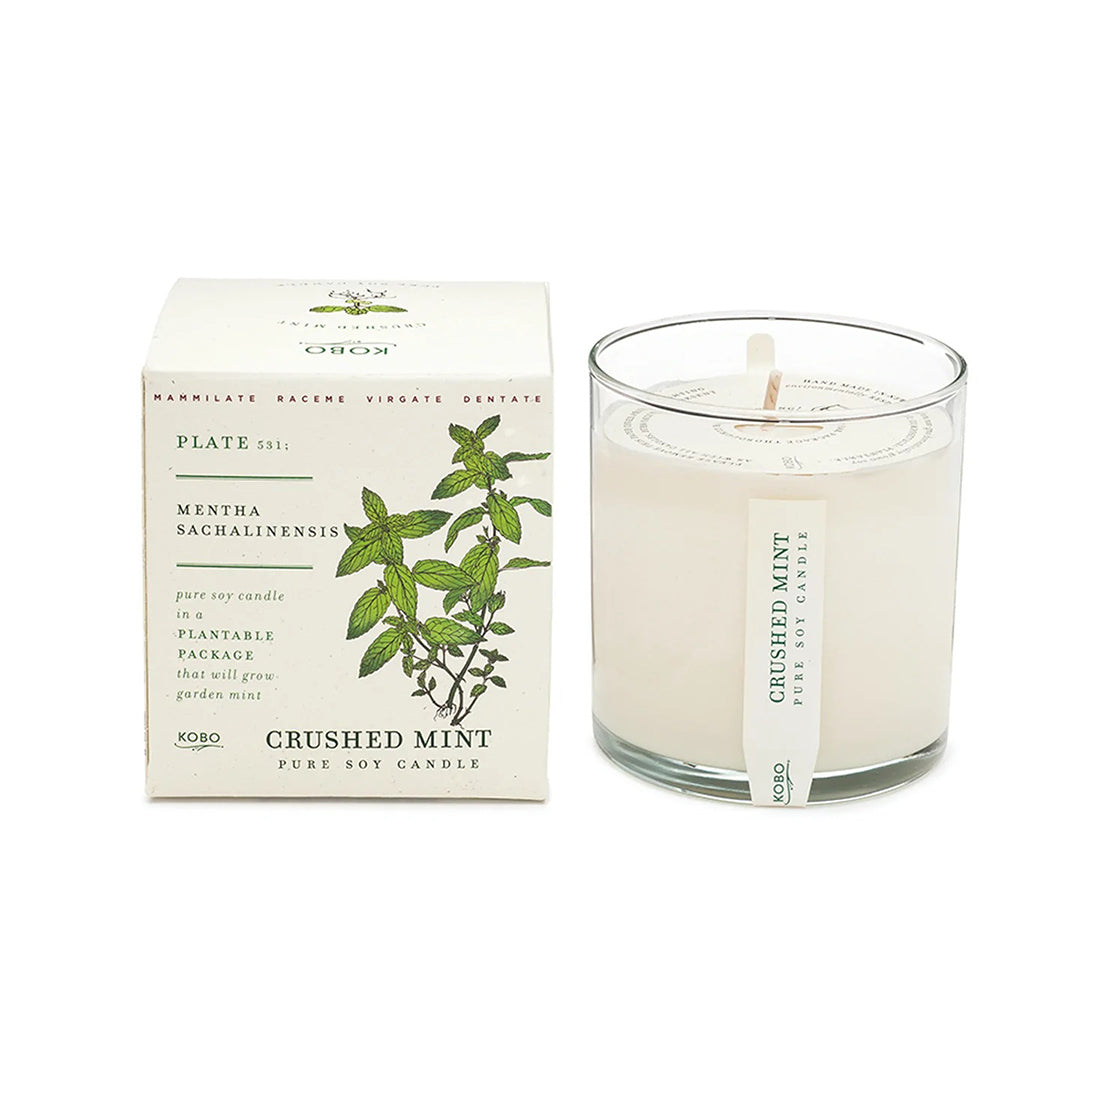 Crushed Mint Candle with Plantable Box